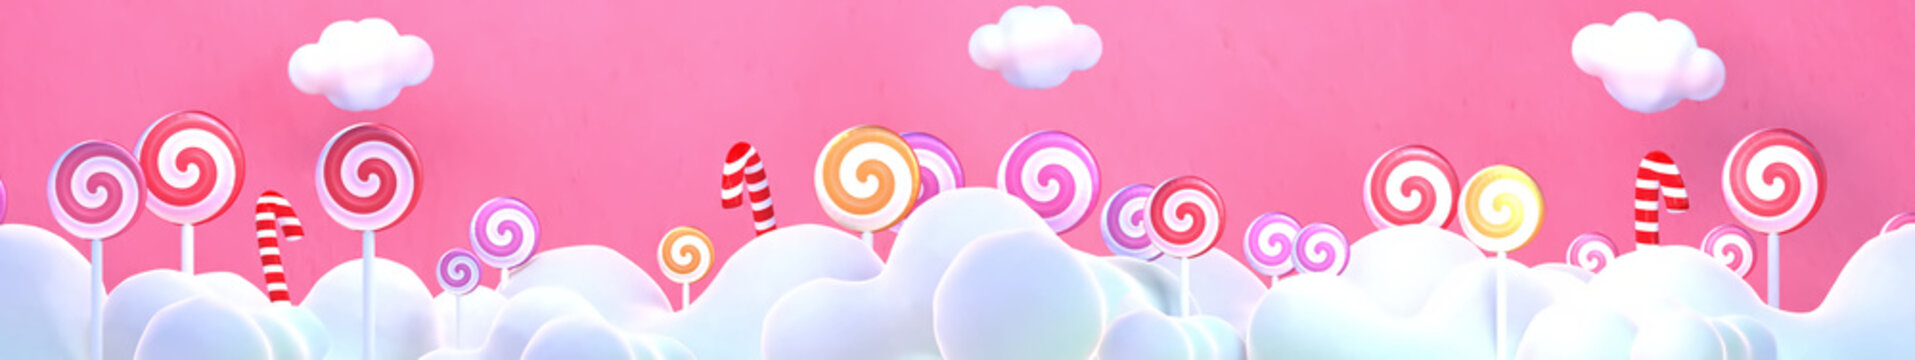 Sweet lollipop candy world. 3d rendering picture.